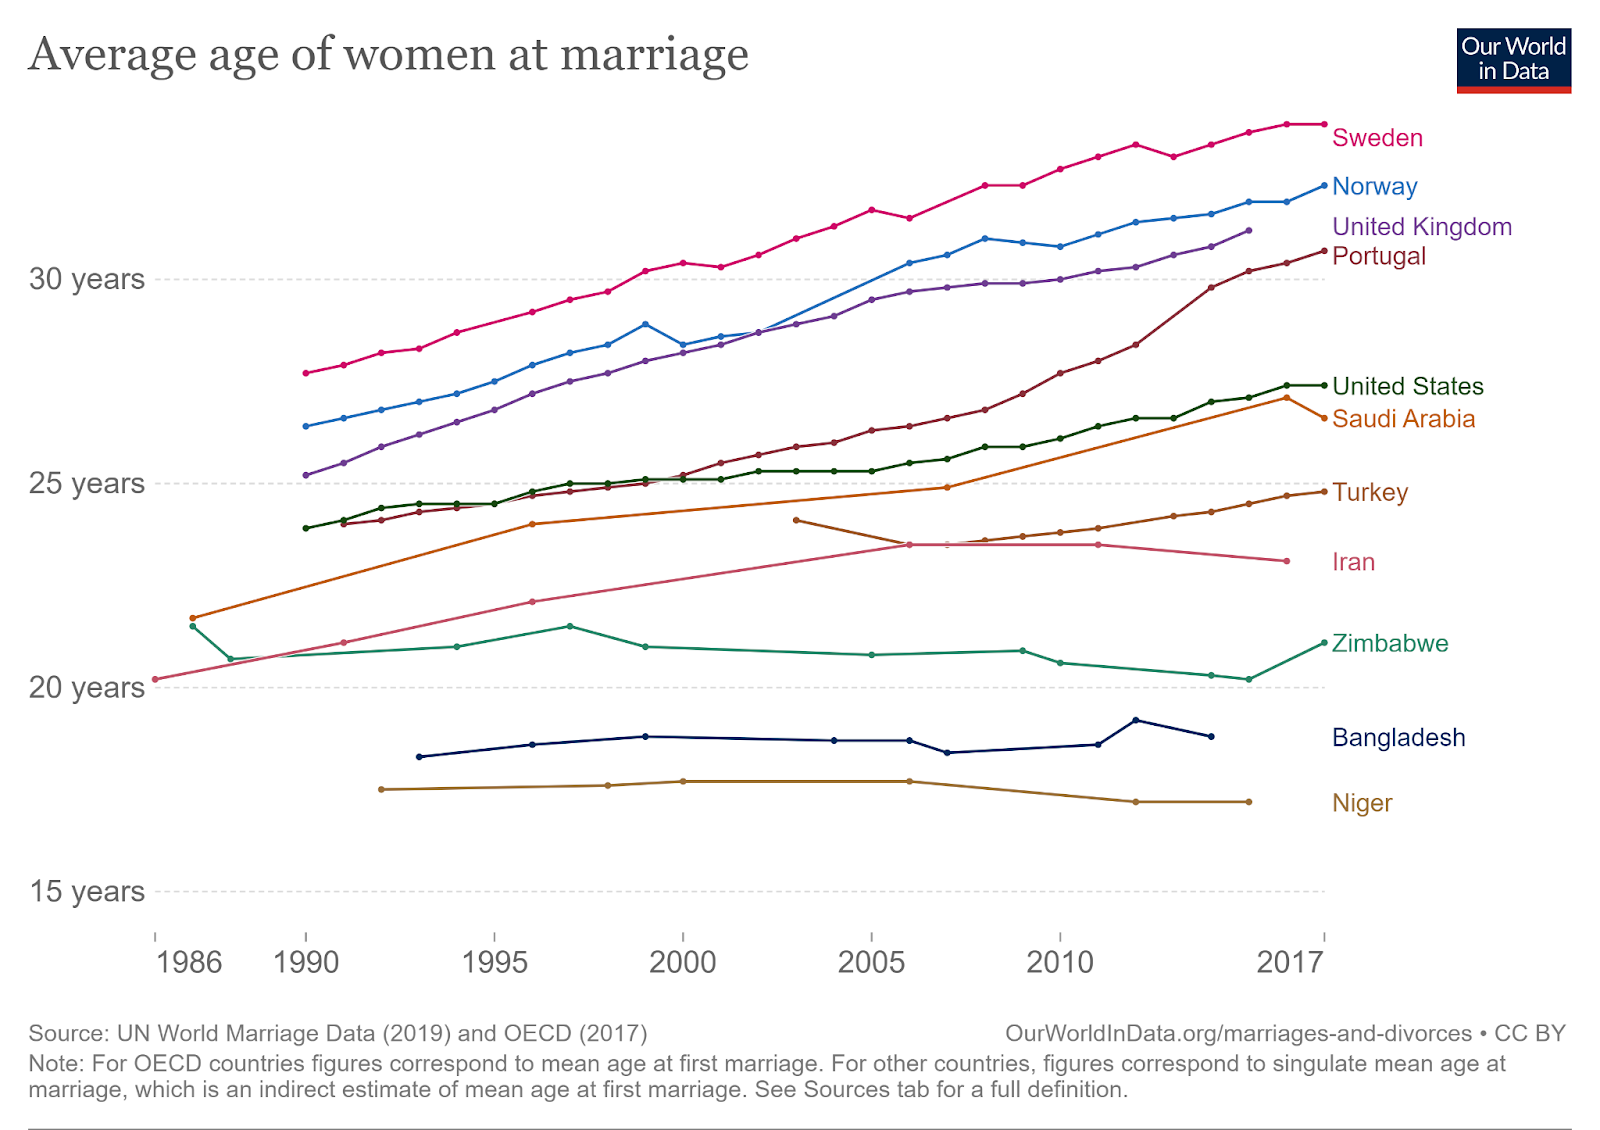 External image of a graph showing “Average age of women at marriage”. The Y-axis shows the average years women get married and the X-axis shows the years between 1986 and 2017. The graph shows: Sweden’s graph began in 1990 at 27 years and had a constant increase, ending at 34 years in 2017. Norway’s graph began in 1990 at 26 years and had a constant increase, ending at 32 years in 2017. The United Kingdom’s graph began in 1990 at 25 years and had a constant increase, ending at 31 years in 2015. Portugal’s graph began in 1991 at 24 years and had a constant increase, ending at 31 years in 2017. The United States’ graph began in 1990 at 24 years and had a constant increase, ending at 27 years in 2017. Saudi Arabia's graph began in 1987 at 23 years and had a constant increase, ending at 26 years in 2017. Turkey’s graph began in 2003 at 24 years and had a slight decrease and then increase, ending at 25 years in 2017. Iran’s graph began in 1986 at 20 years and had a constant increase, ending at 23 years in 2017. Zimbabwe’s graph began in 1987 at 22 years and stayed fairly constant, only a slight decrease ending at 21 years in 2017. Bangladesh’s graph began in 1993 at 18 years and stayed fairly constant, with only a slight increase; it ended at 19 years in 2015. Niger’s graph began in 1992 at 17 years and stayed constant, ending at 17 years in 2016. The source for this data is: UN World Marriage Data (2019) and OECD (2017). OurWorldInData.org/marriages-and-divorces. CC BY.  Note: For OECD countries figures correspond to mean age at first marriage. For other countries, figures correspond to singulate mean age at marriage, which is an indirect estimate of mean age at first marriage.